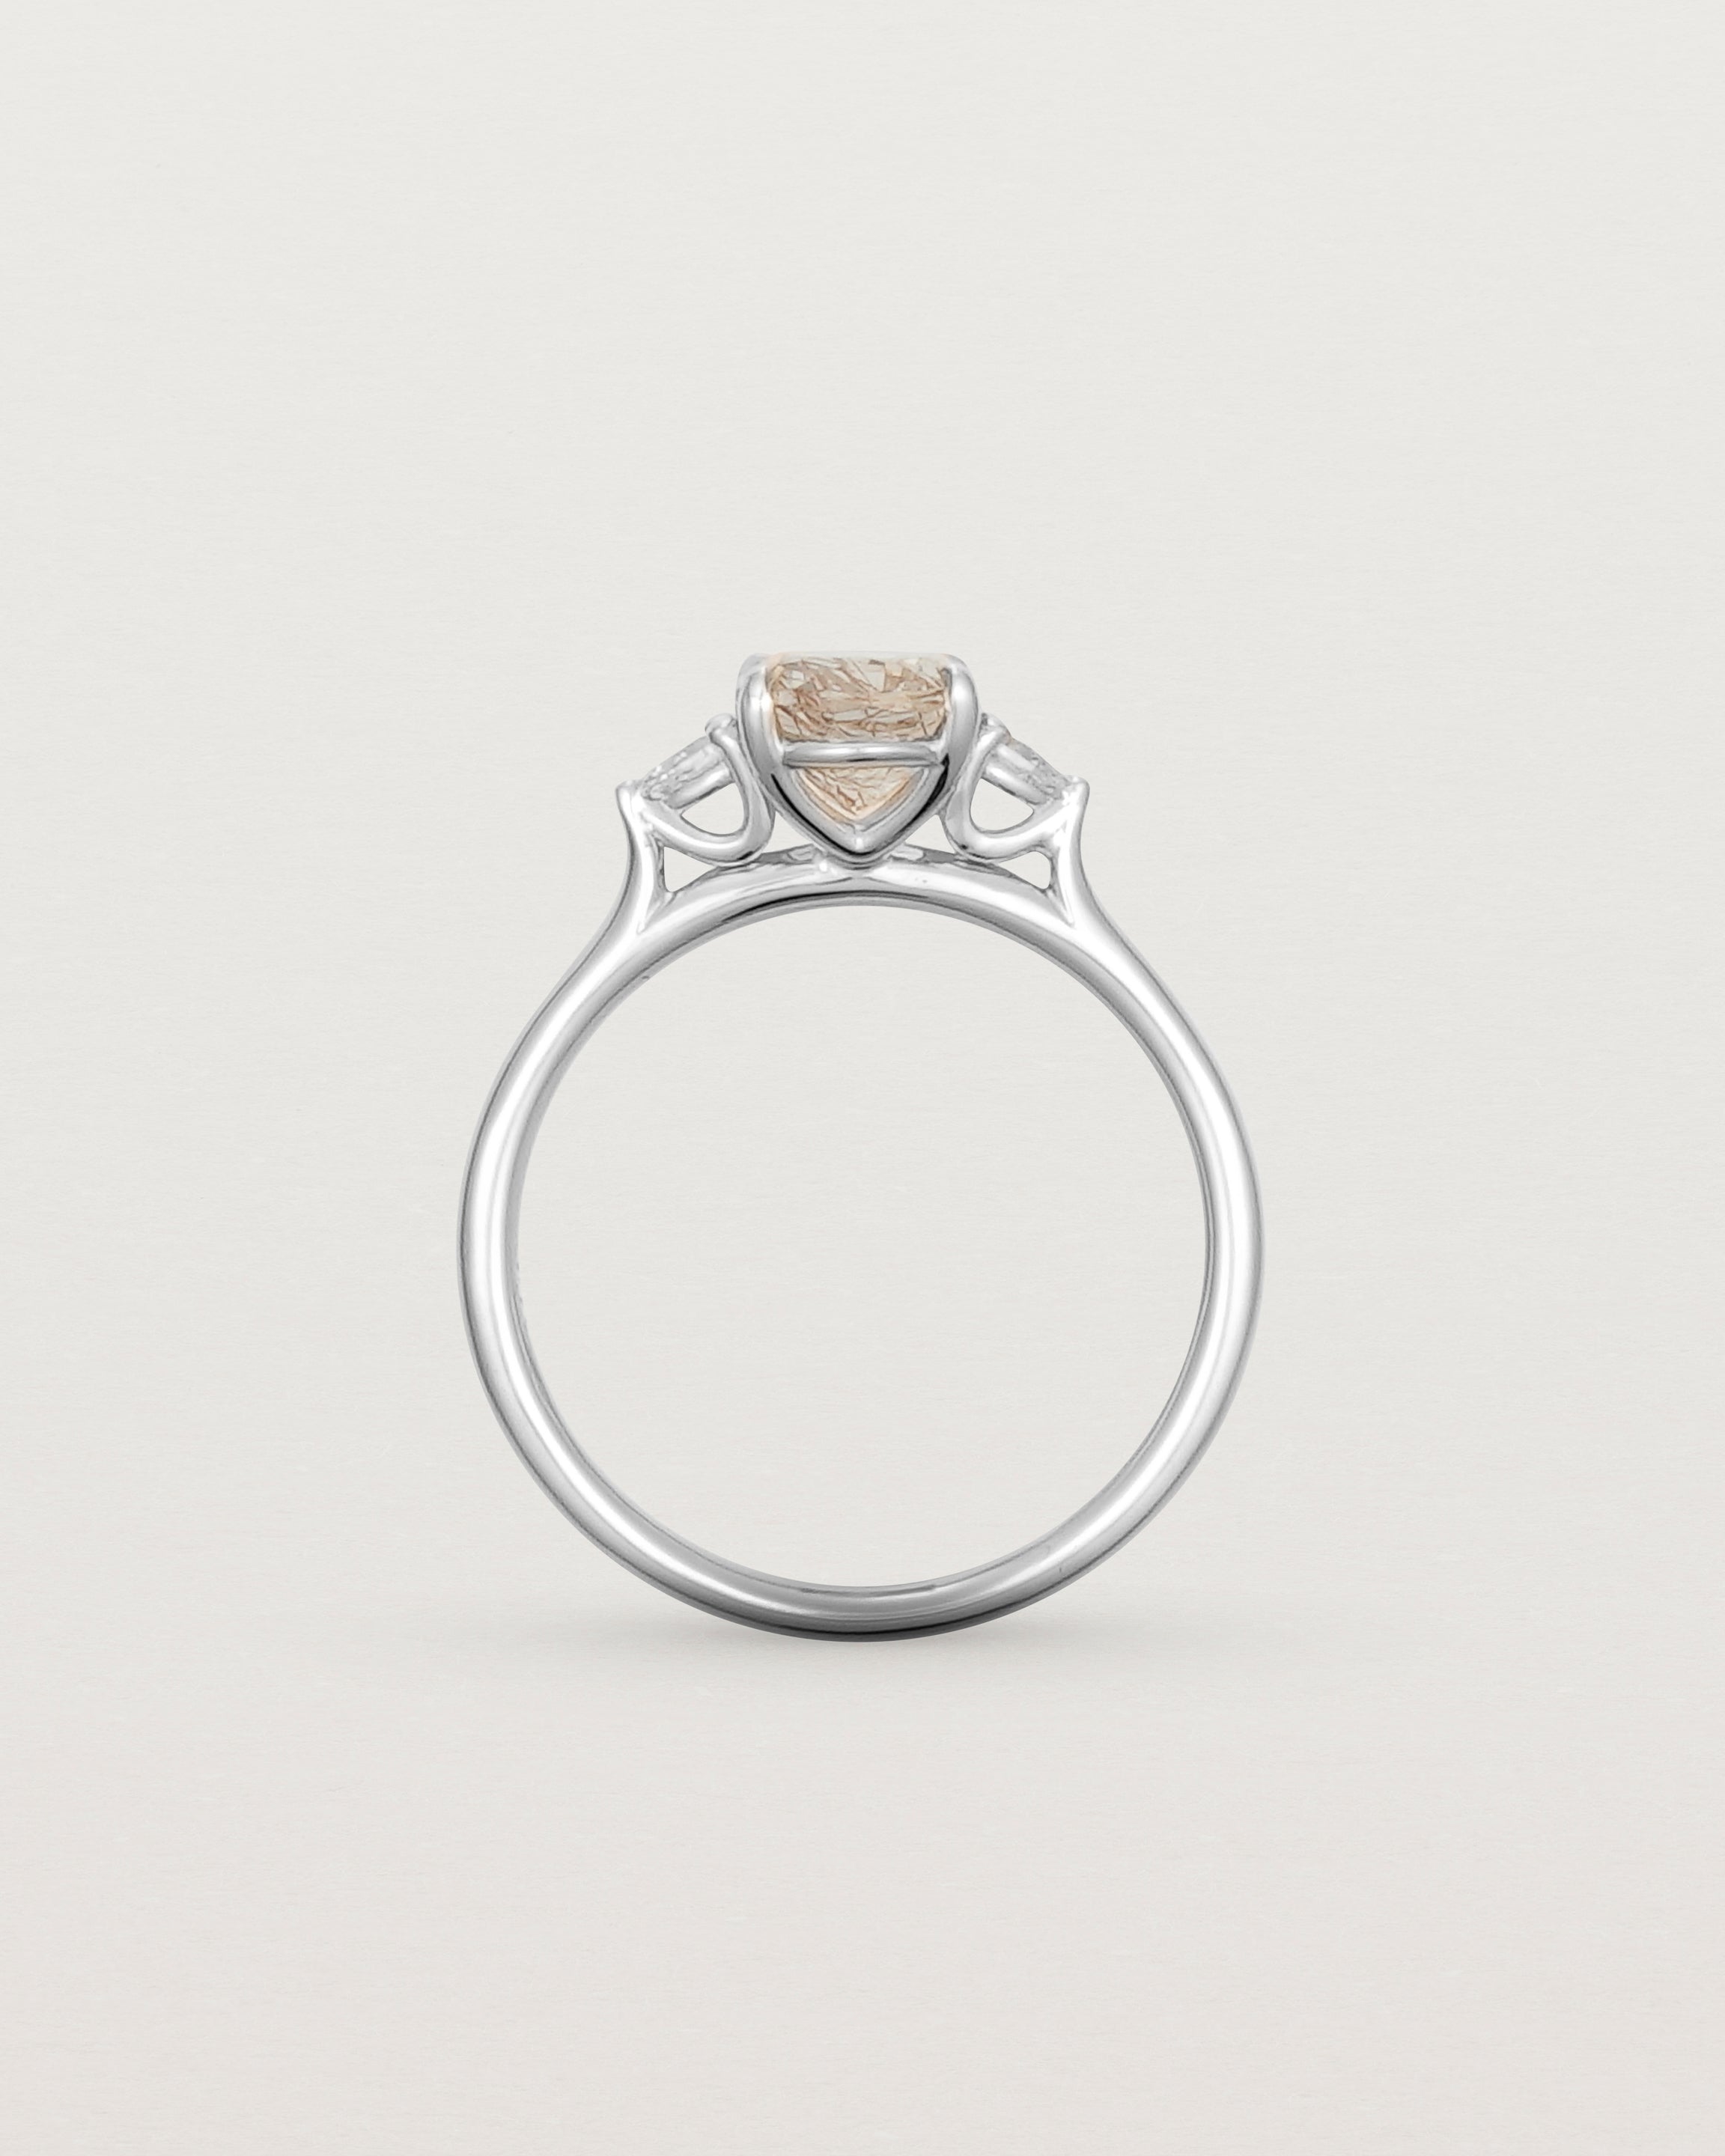 The side profile of an oval Rutilated Quartz adorned with white diamonds either side, featuring a sweeping setting and crafted in white gold